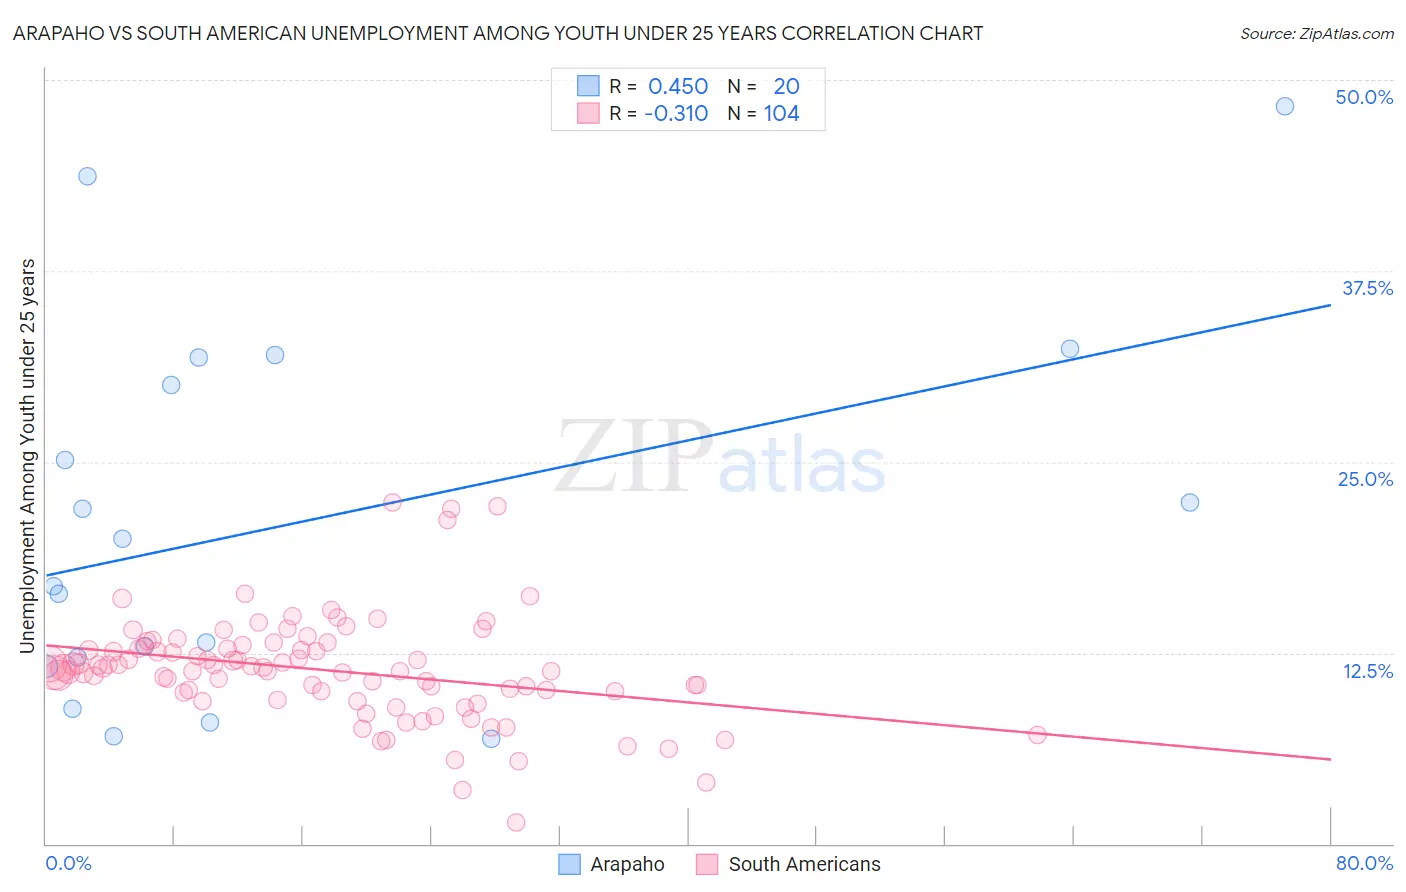 Arapaho vs South American Unemployment Among Youth under 25 years